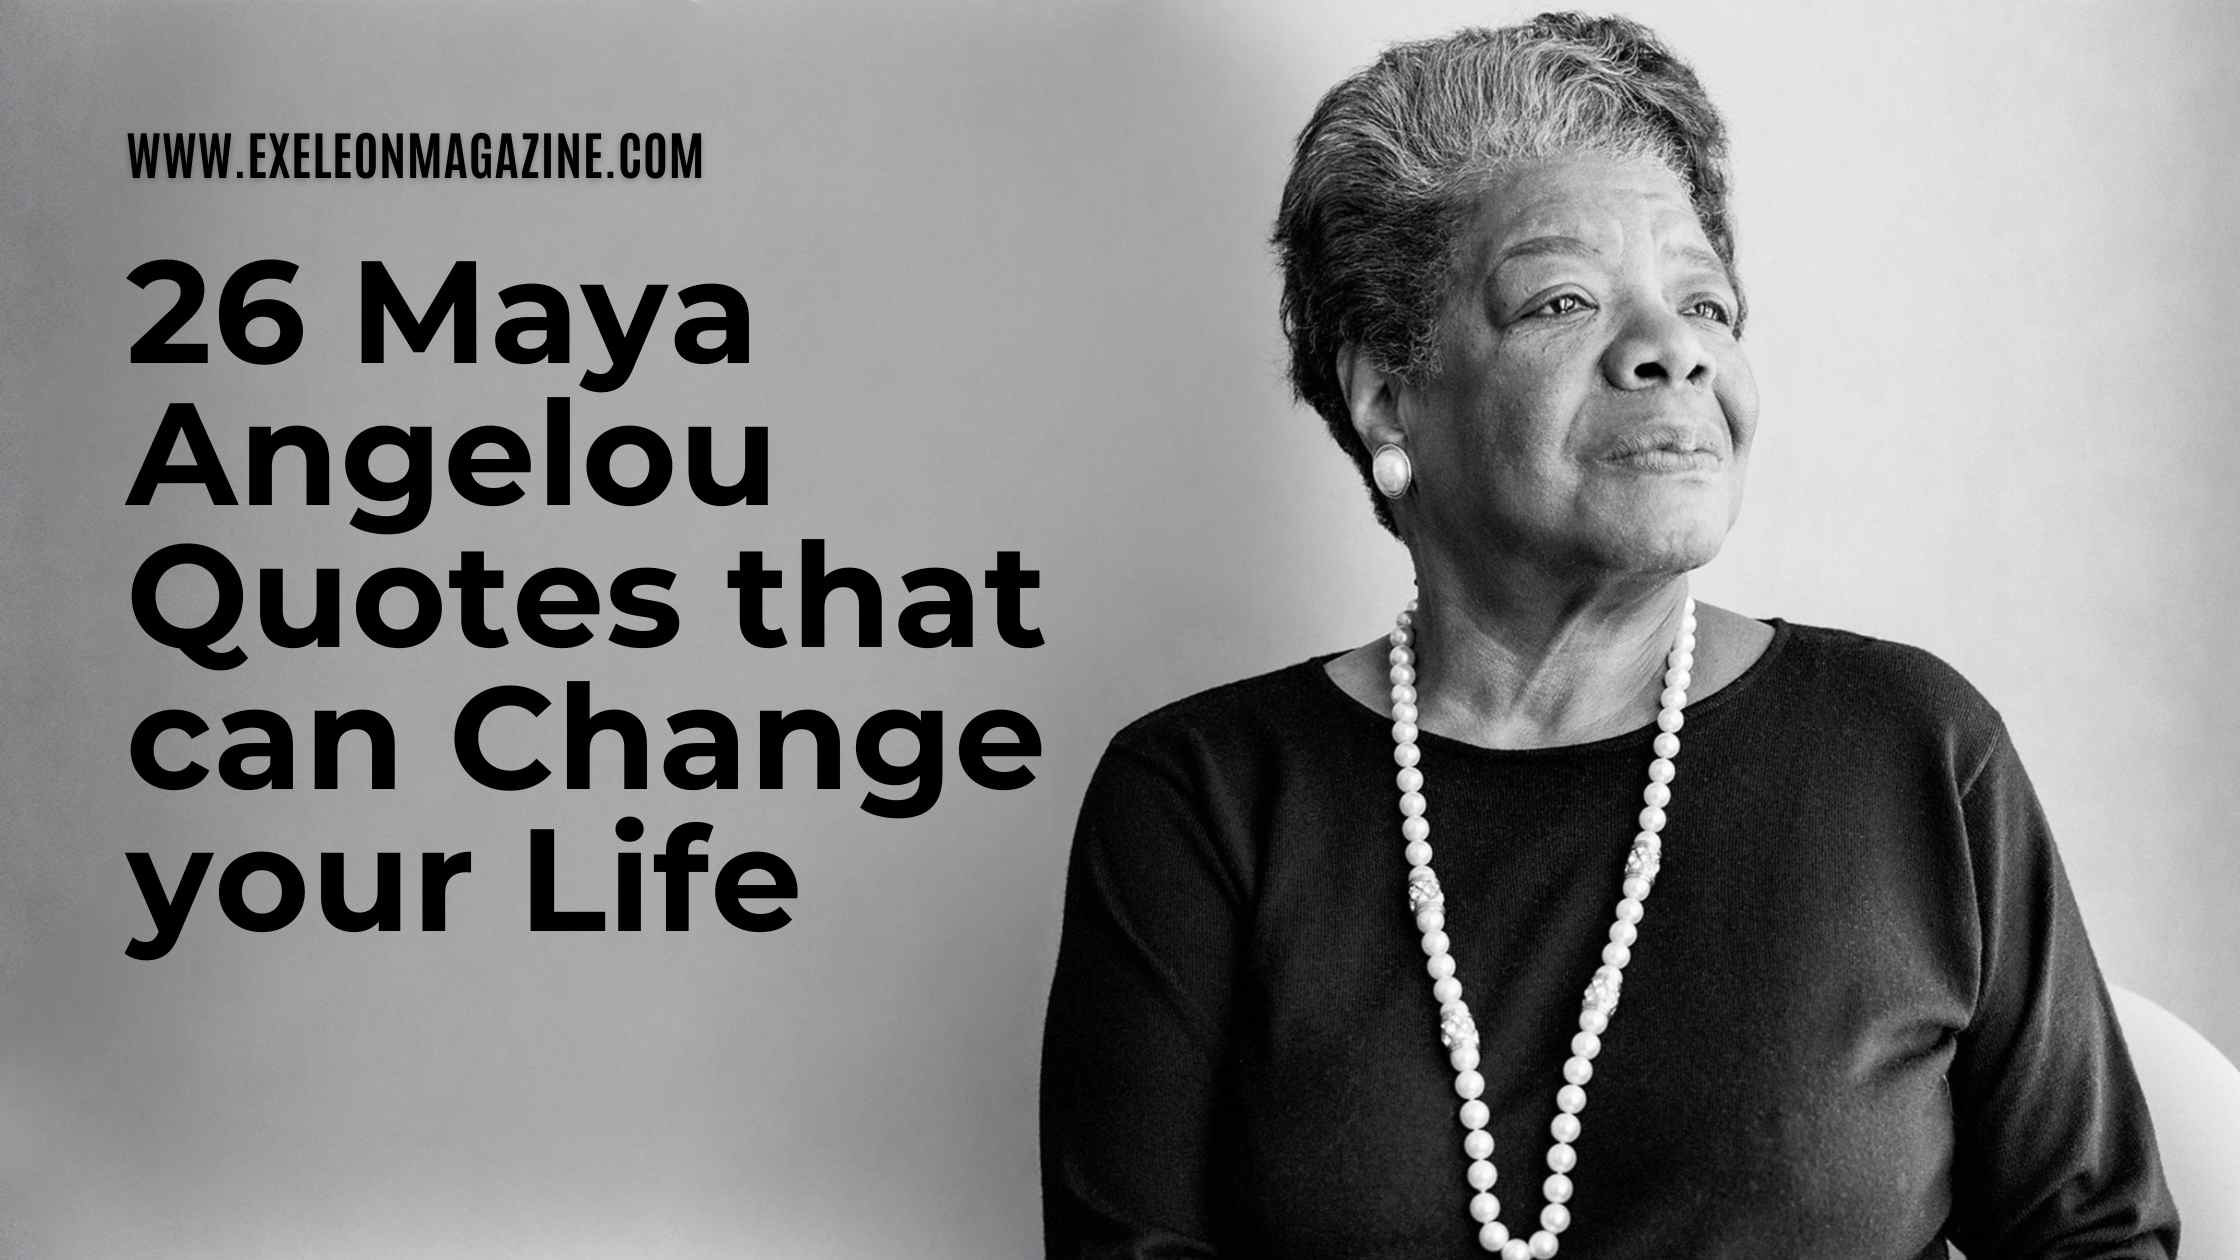 26 Maya Angelou Quotes that can Change your Life | Quotes